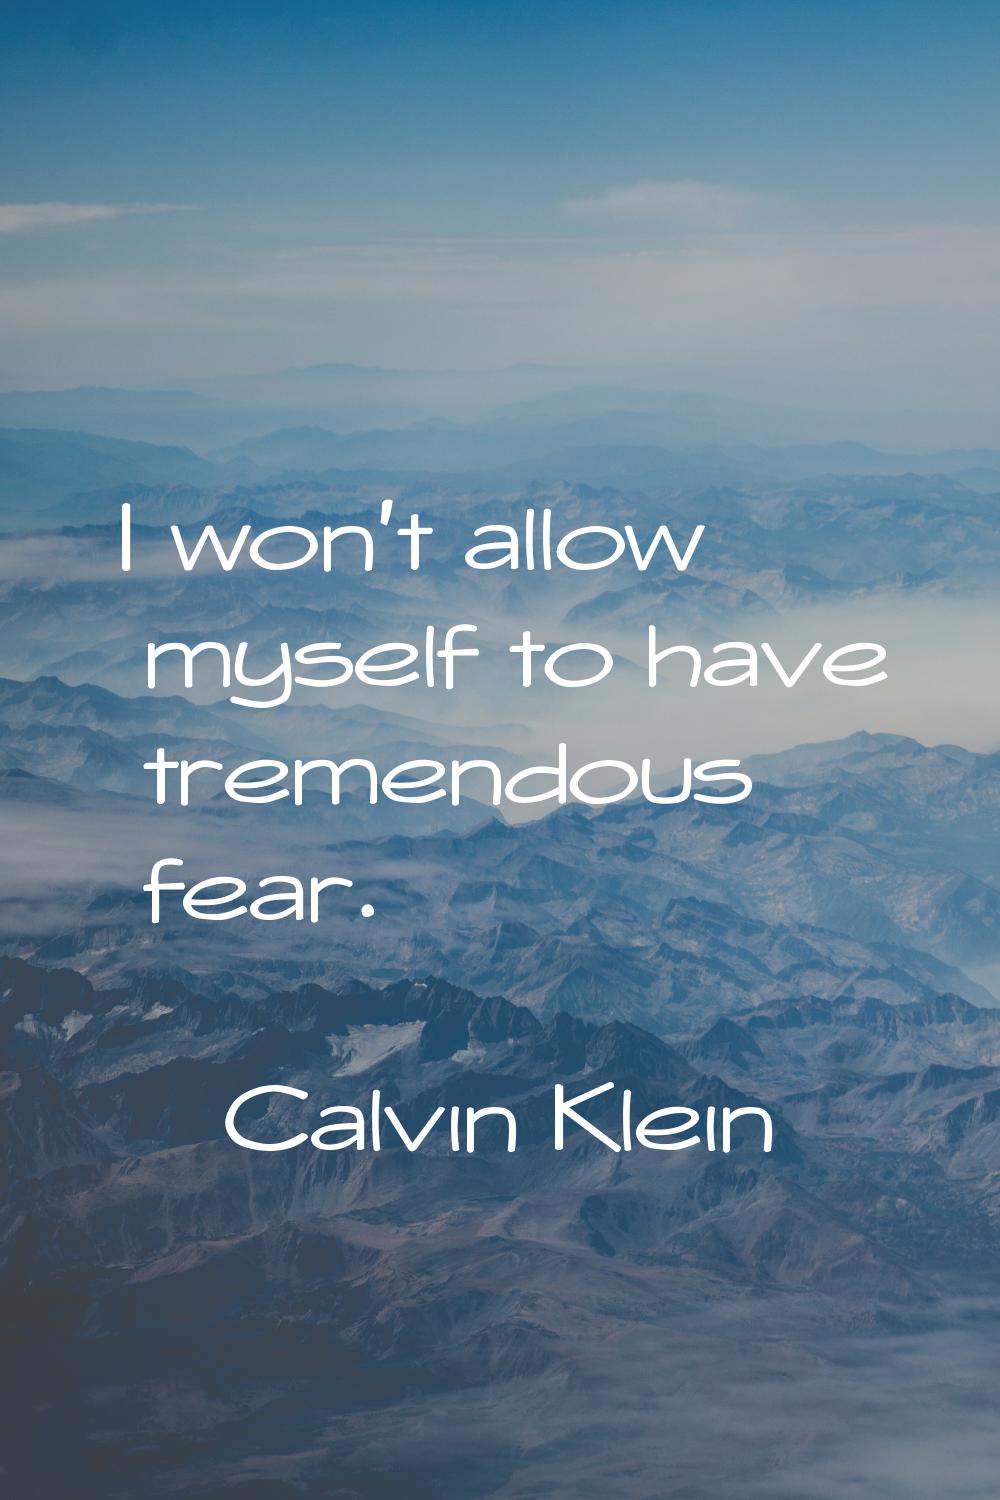 I won't allow myself to have tremendous fear.